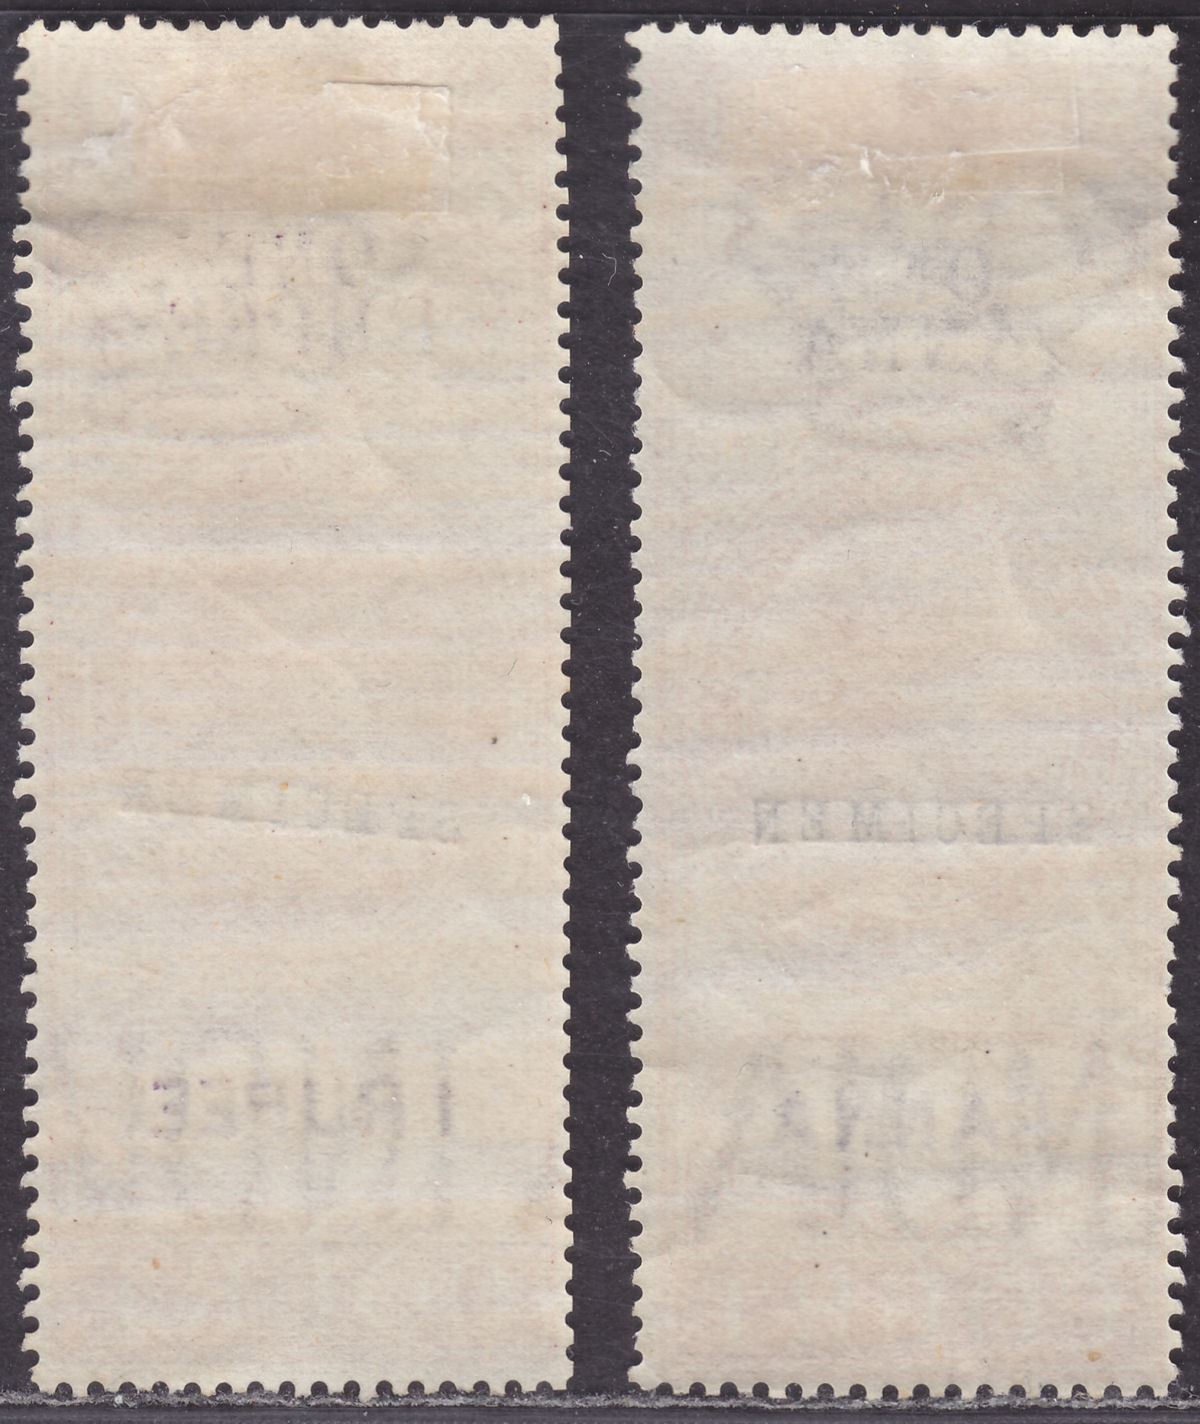 India 1868 QV Revenue Small Cause Court SPECIMEN 1a + 1r BF1s BF10s type 14